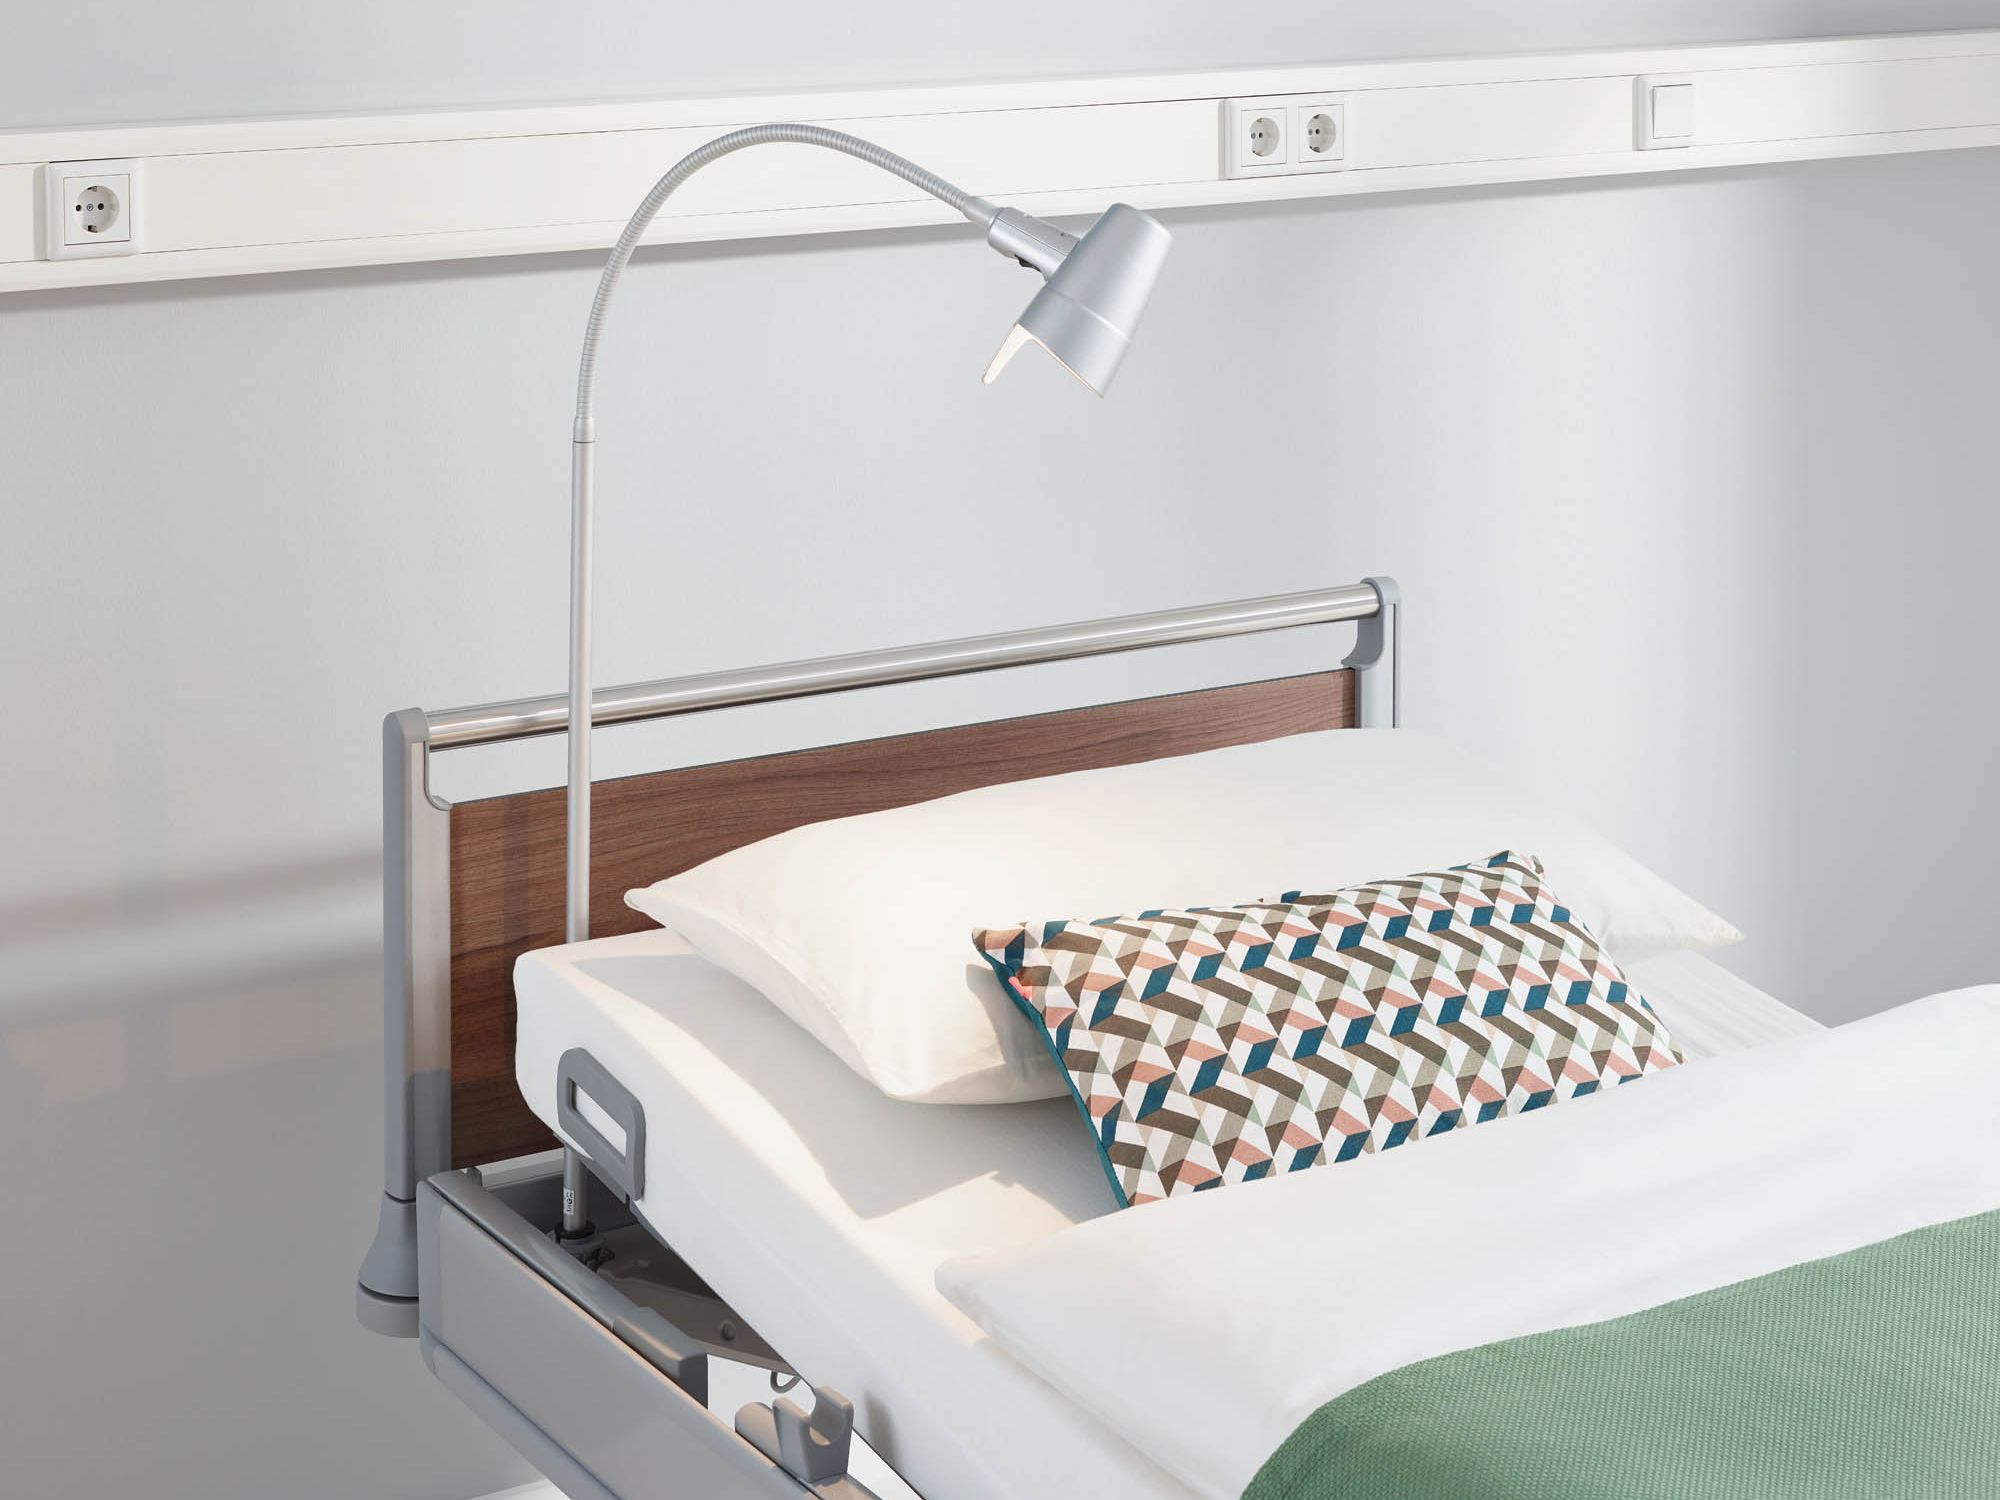 Sola reading lamp with low heat generation